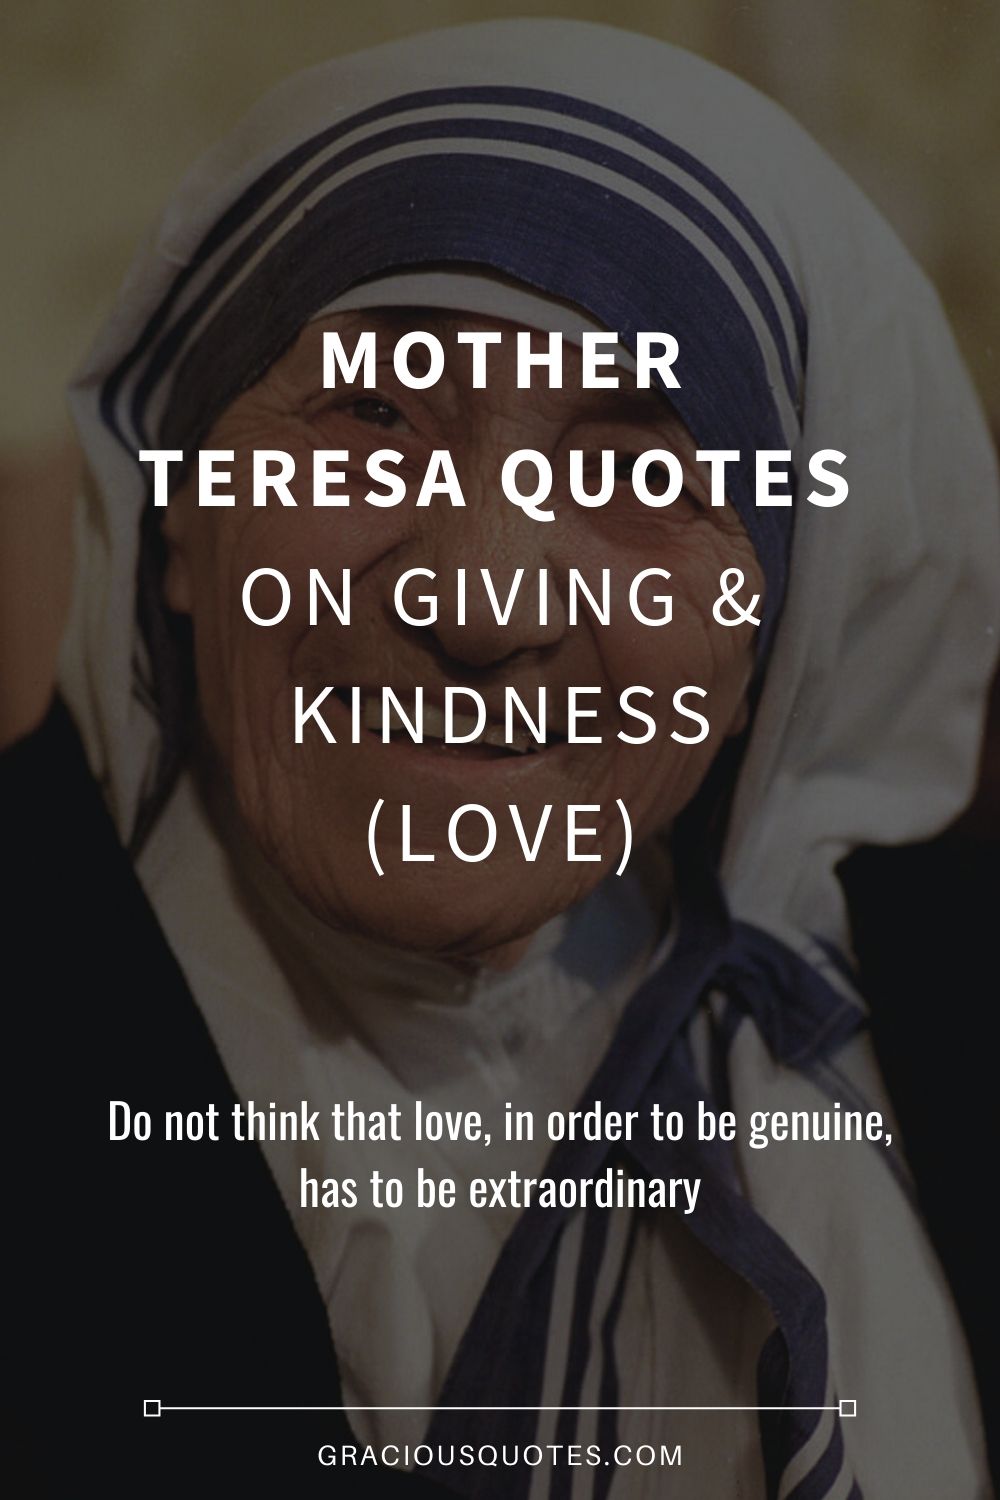 Mother Teresa Quotes on Giving & Kindness (LOVE) - Gracious Quotes